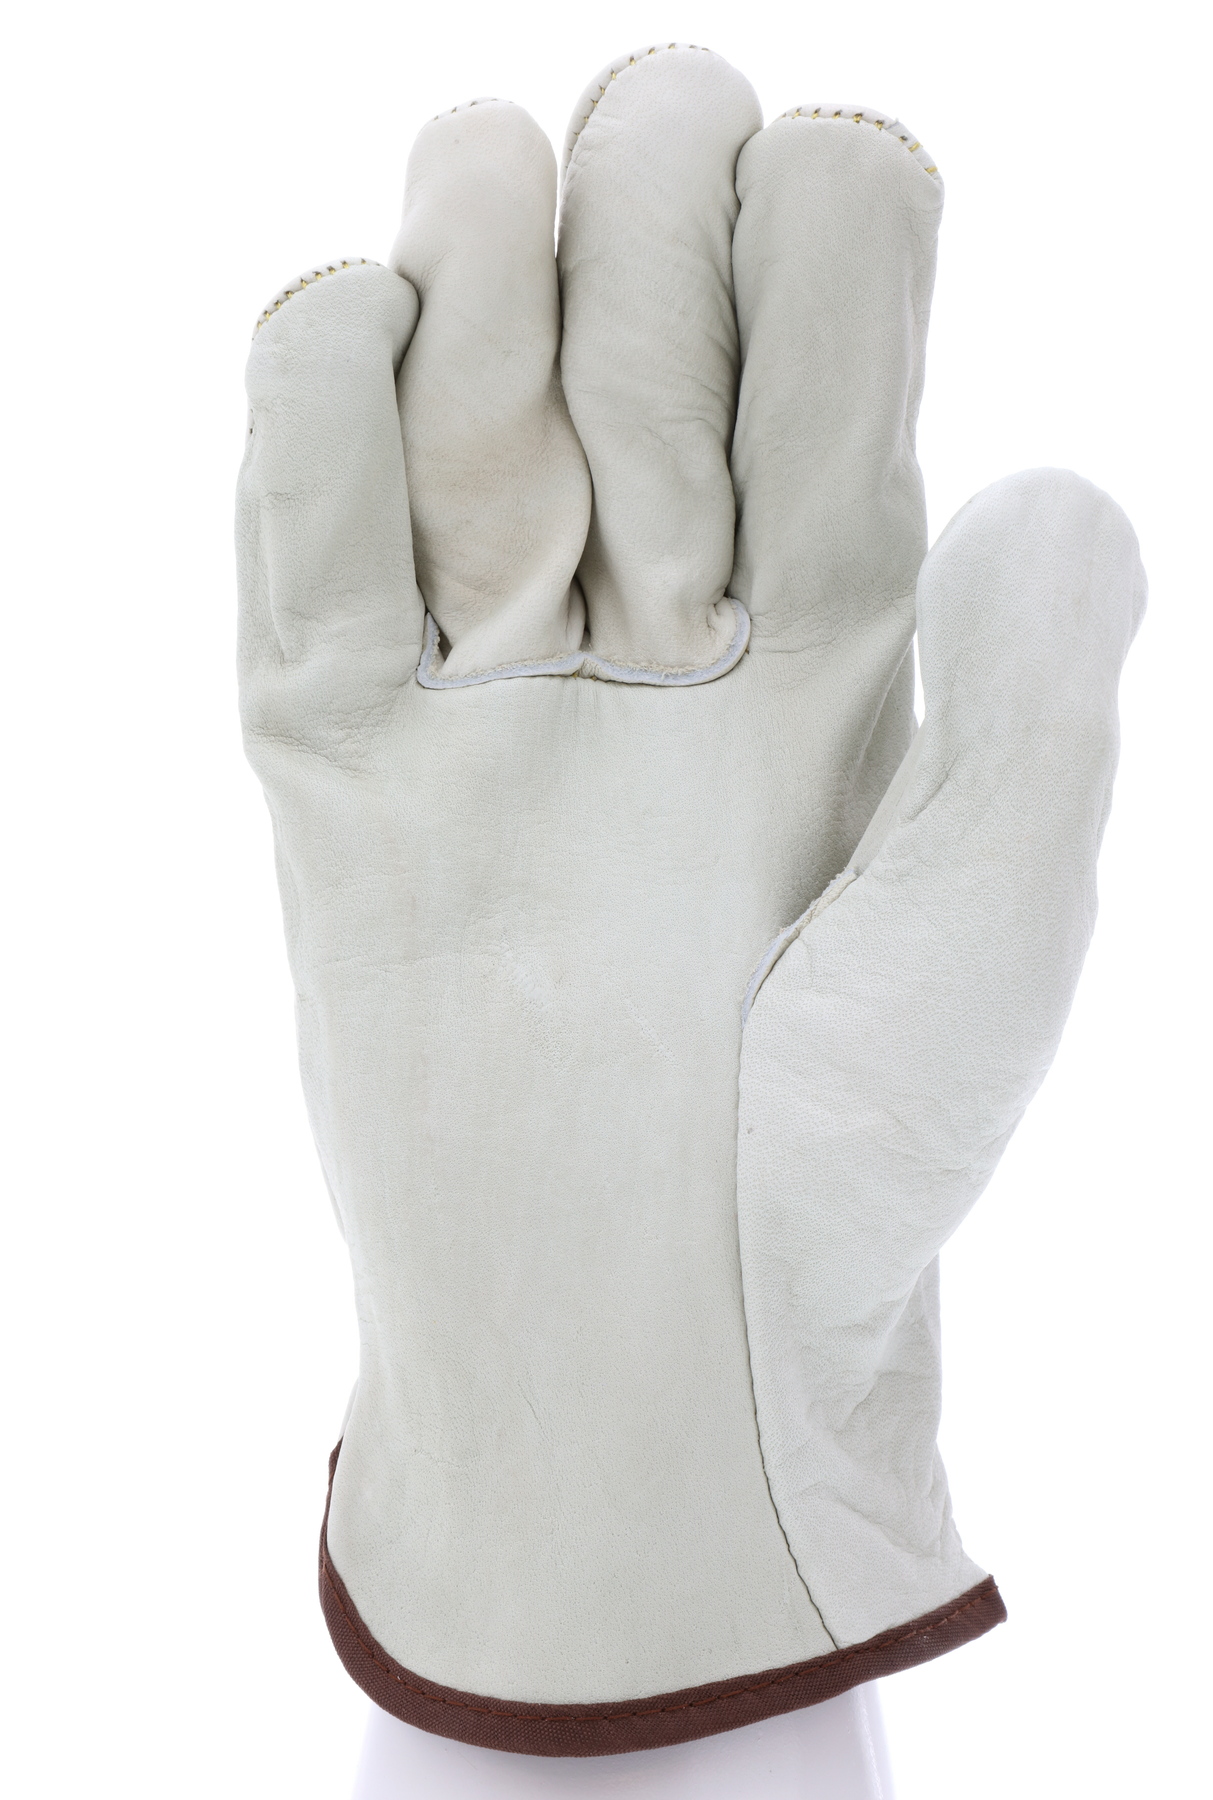 CV Grade Grain Unlined Cow Leather Drivers Gloves